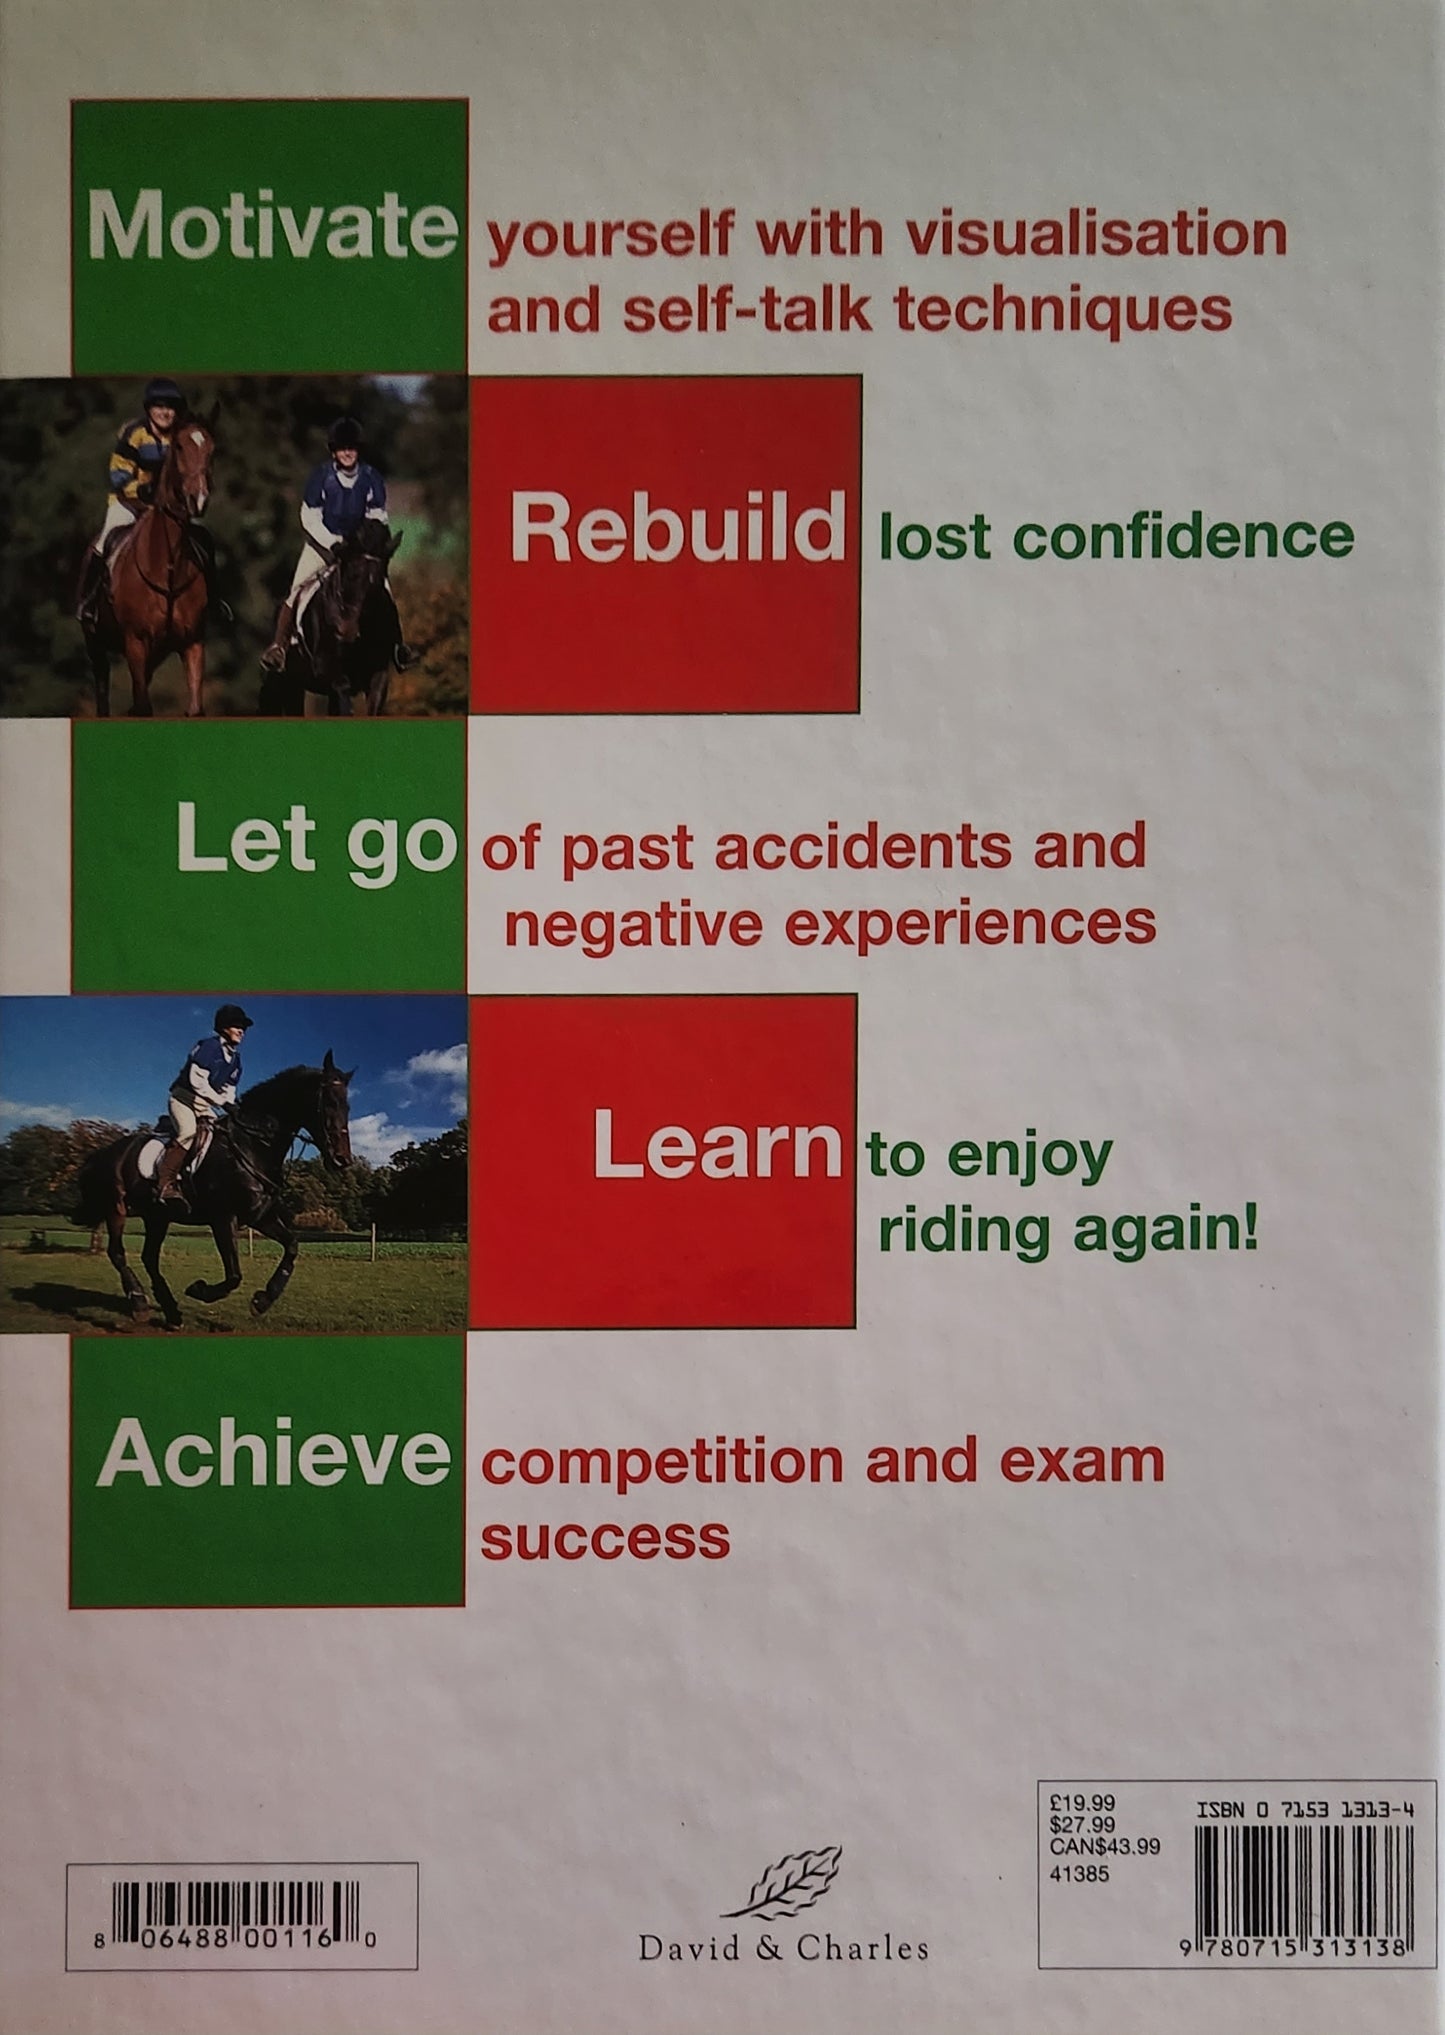 Simple Steps to Riding Success